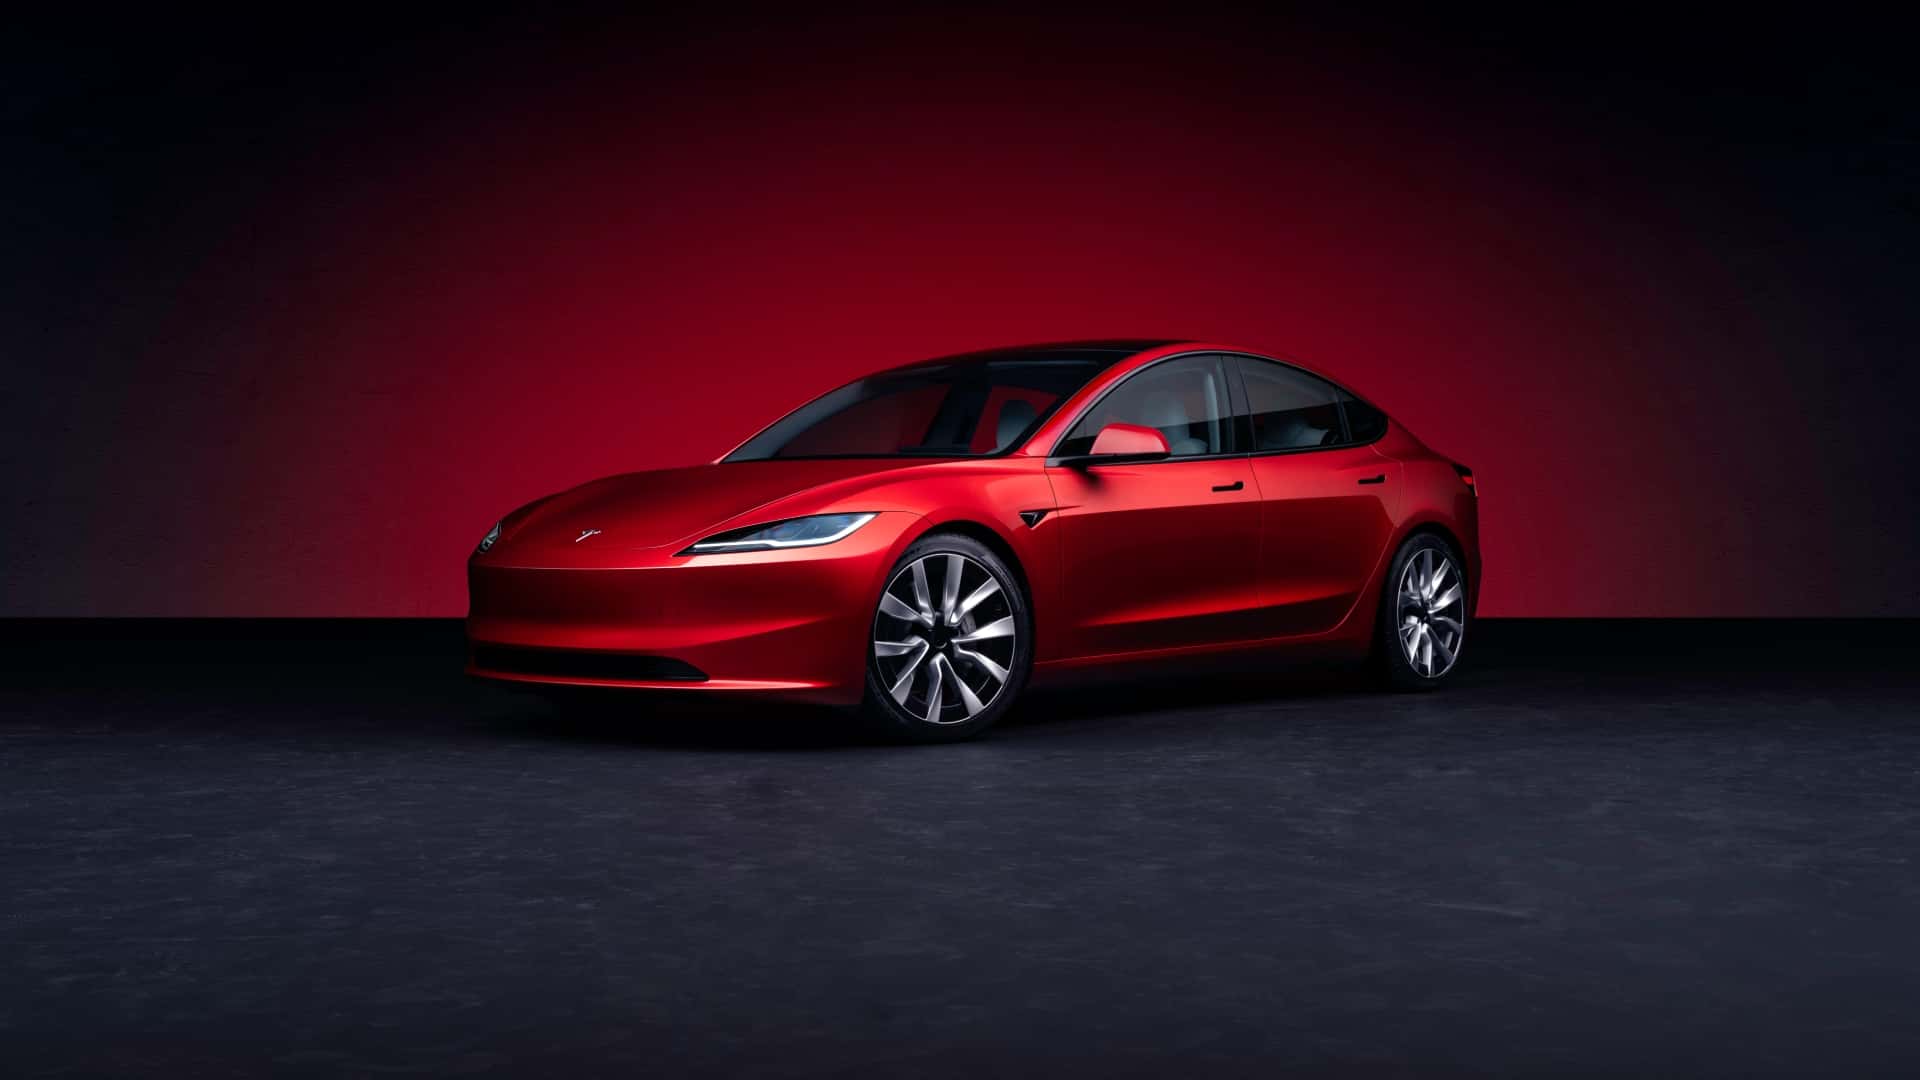 tesla model 3 facelift bows at french owners club event, us debut to follow?